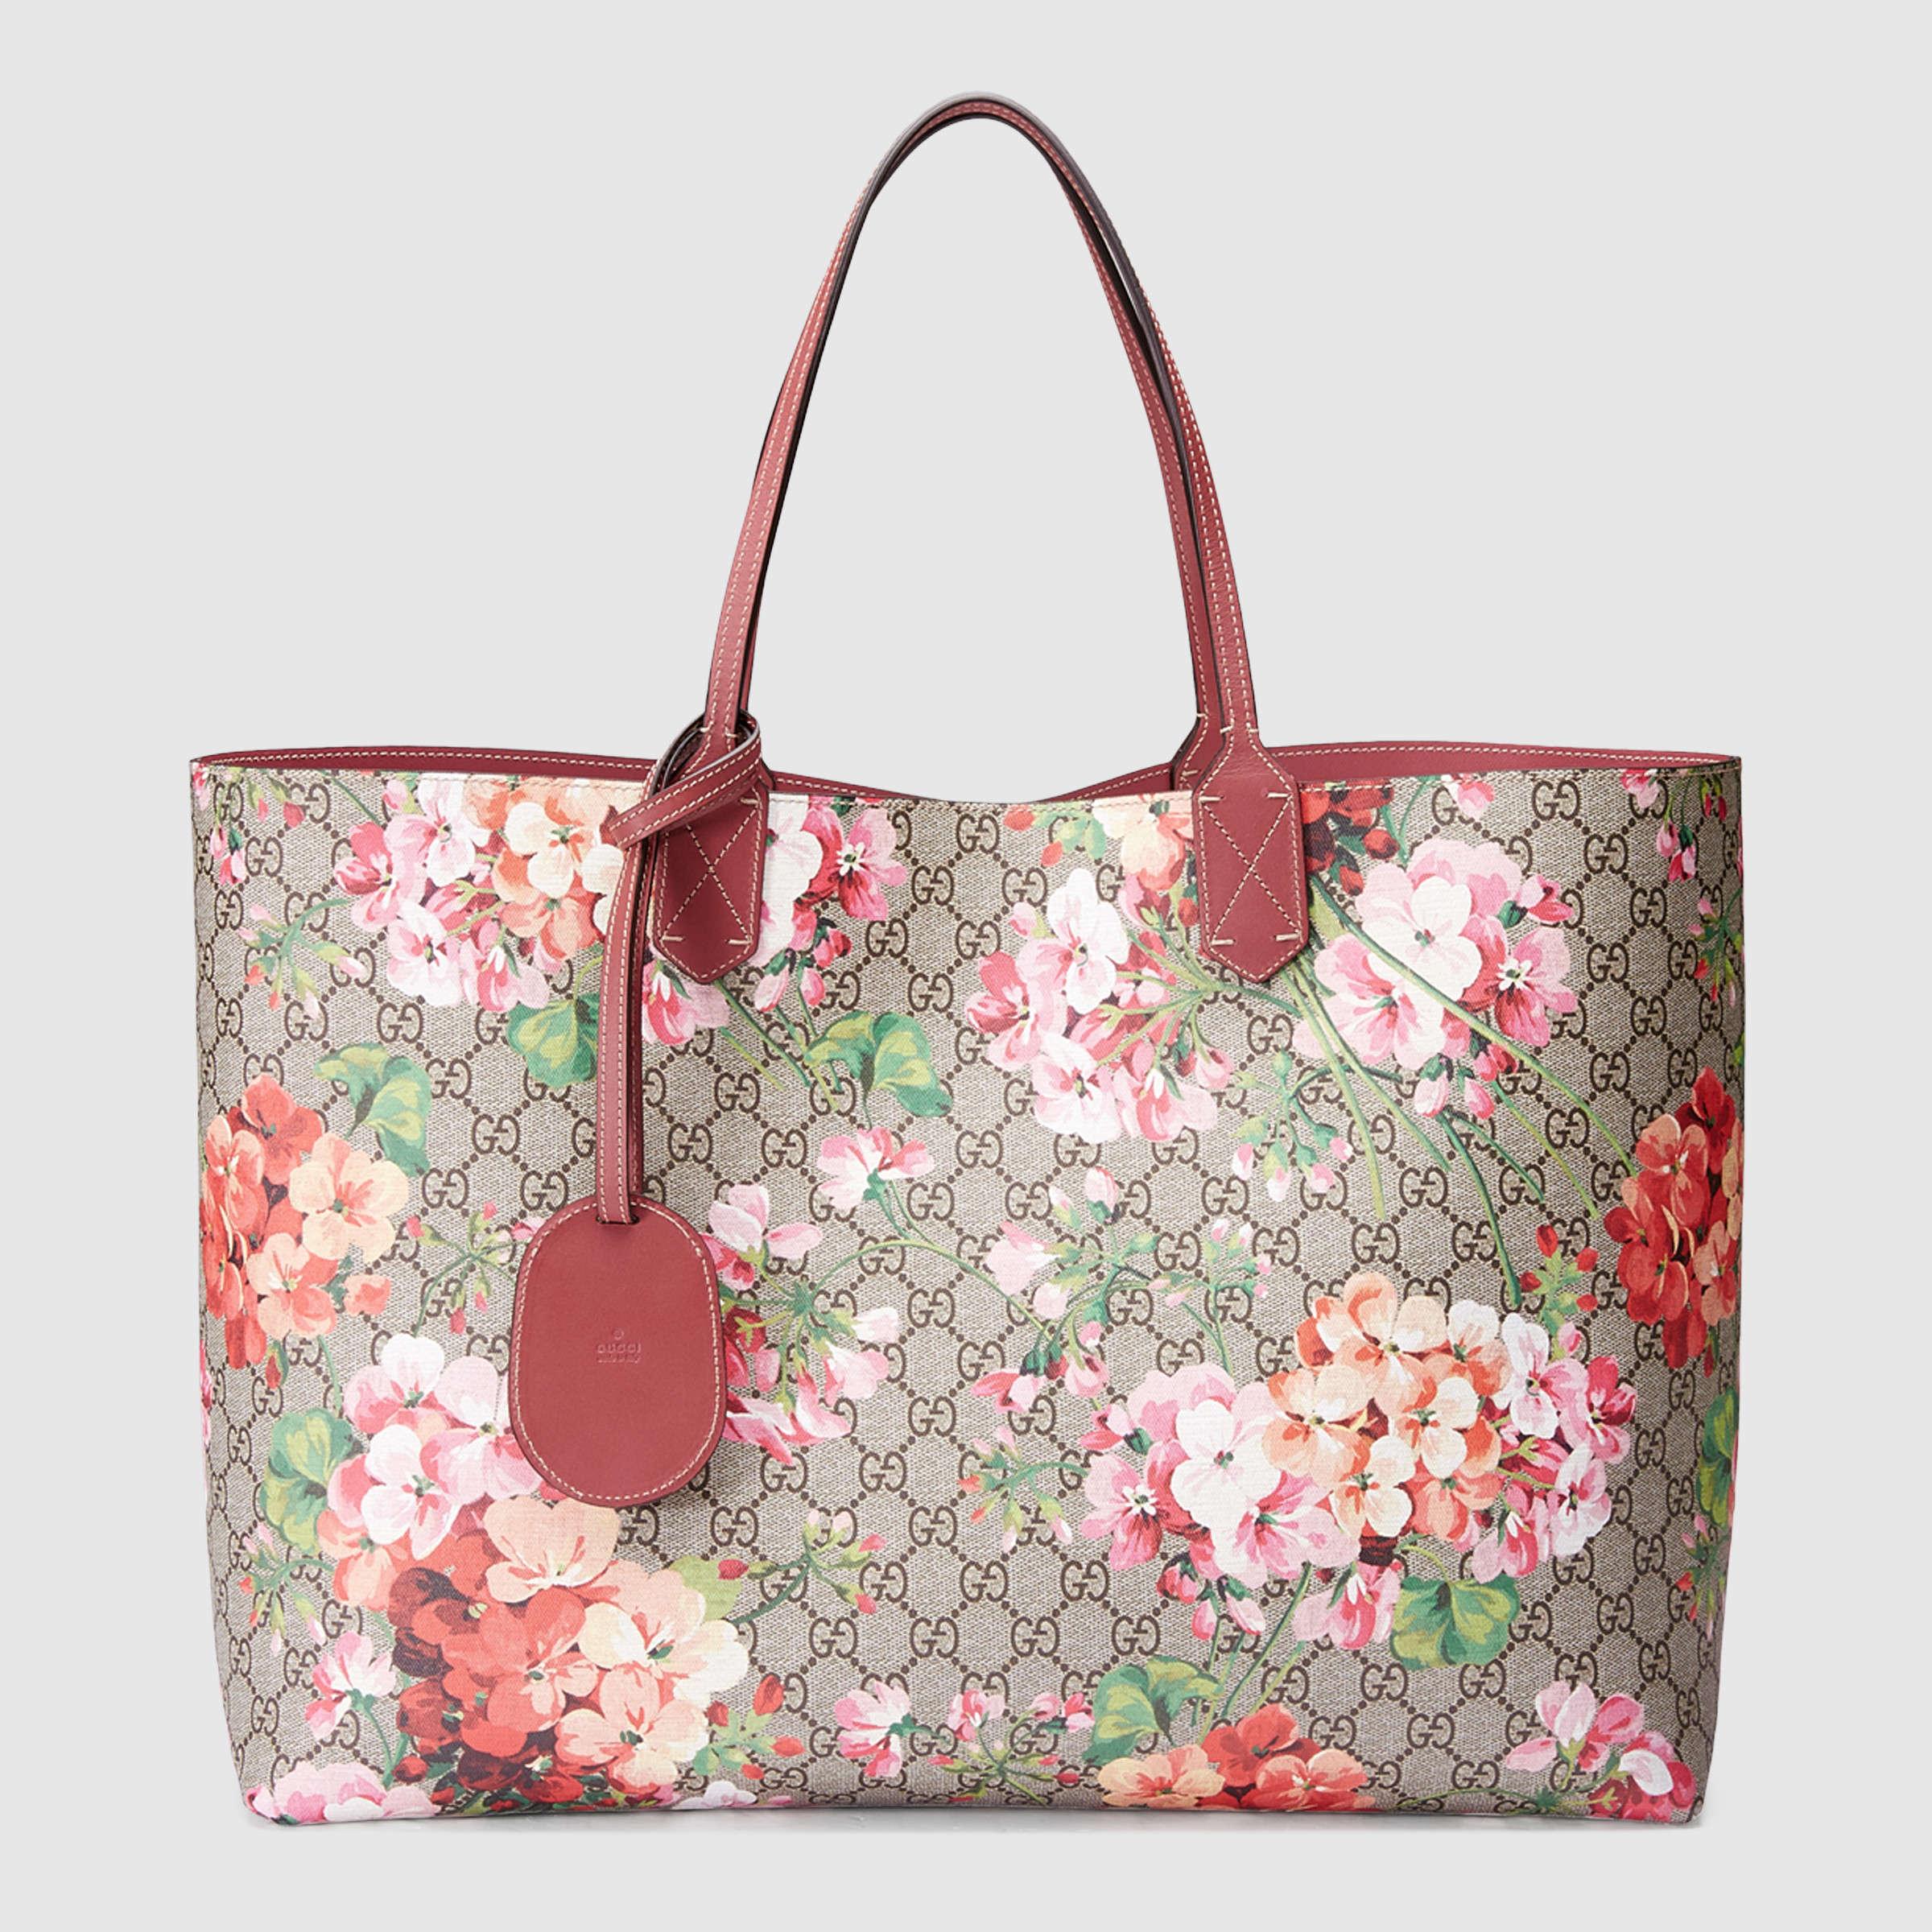 Gucci Reversible Gg Blooms Leather Tote in Pink | Lyst